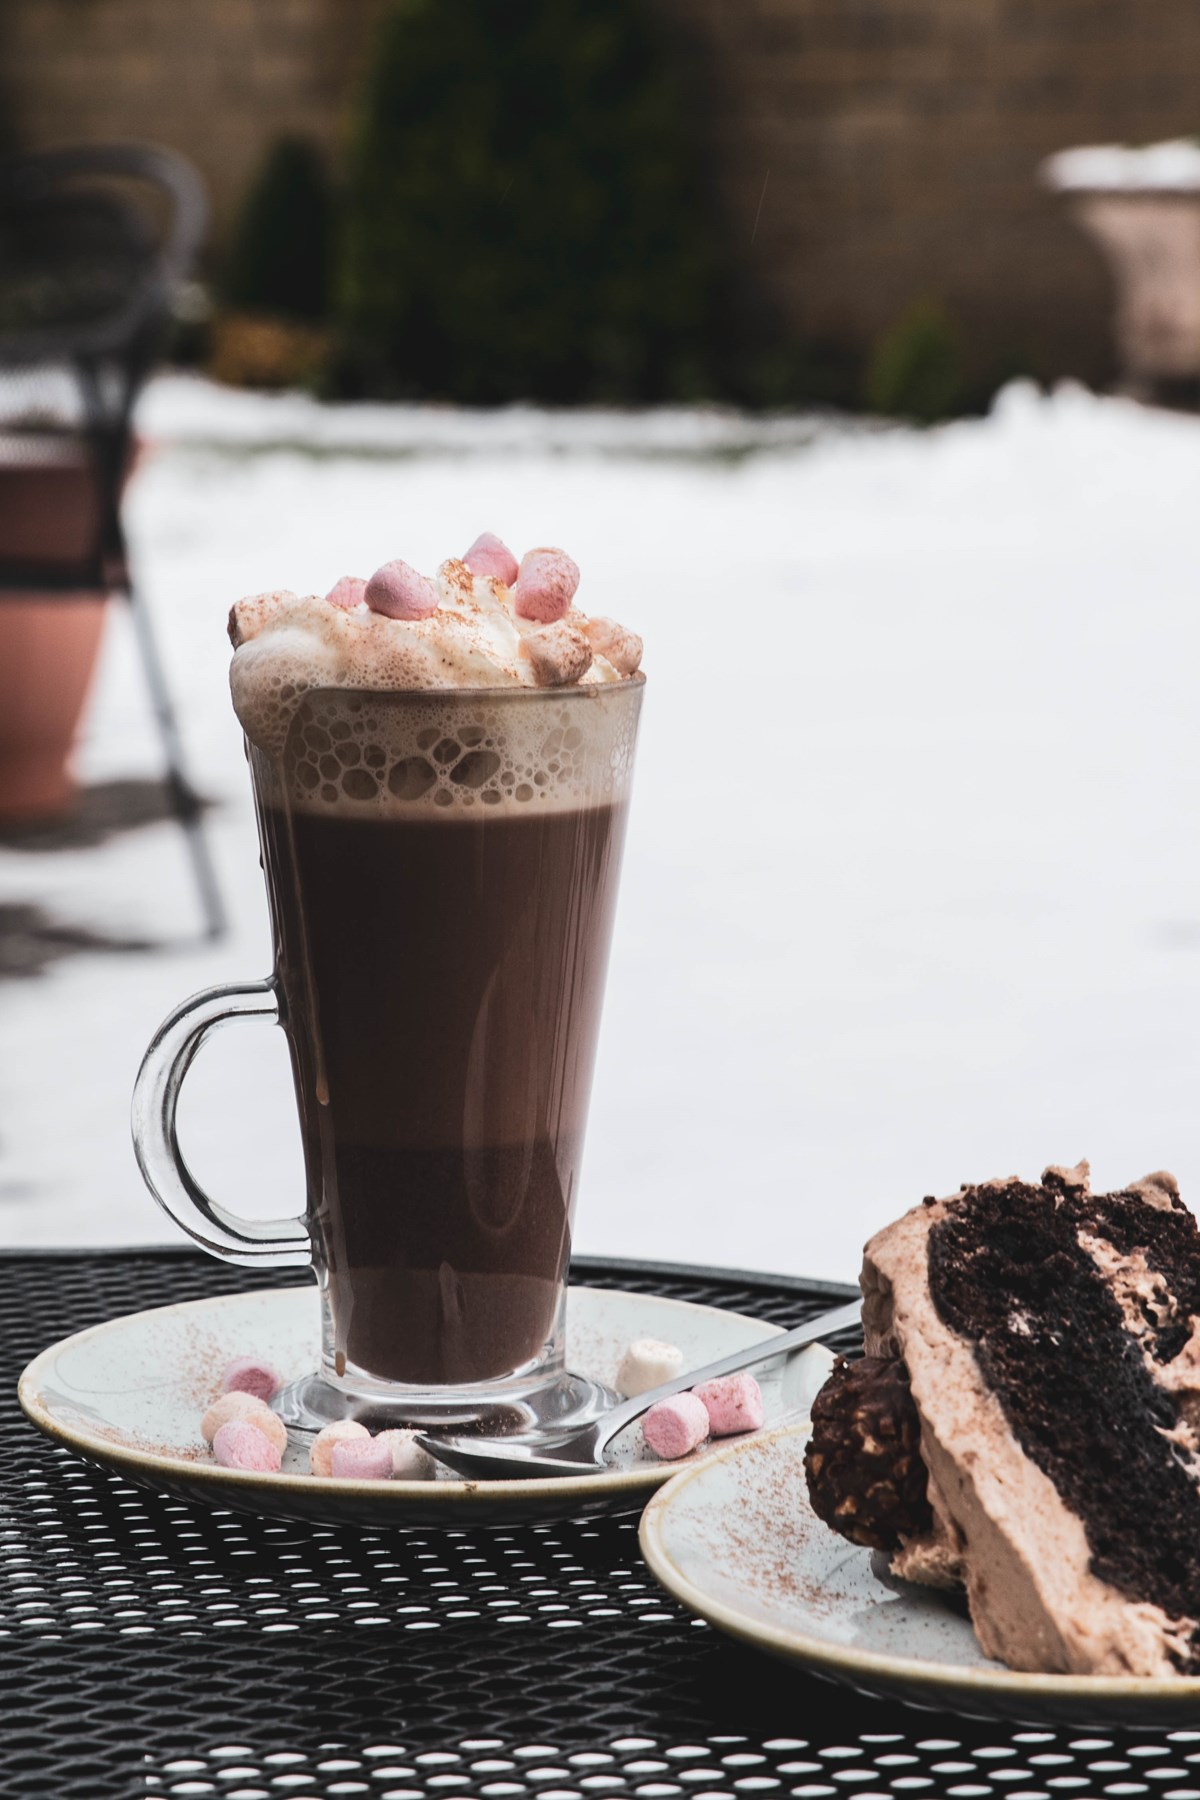 A hot chocolate in the snow, which can be bought at the Dumfries Arms Hotel.